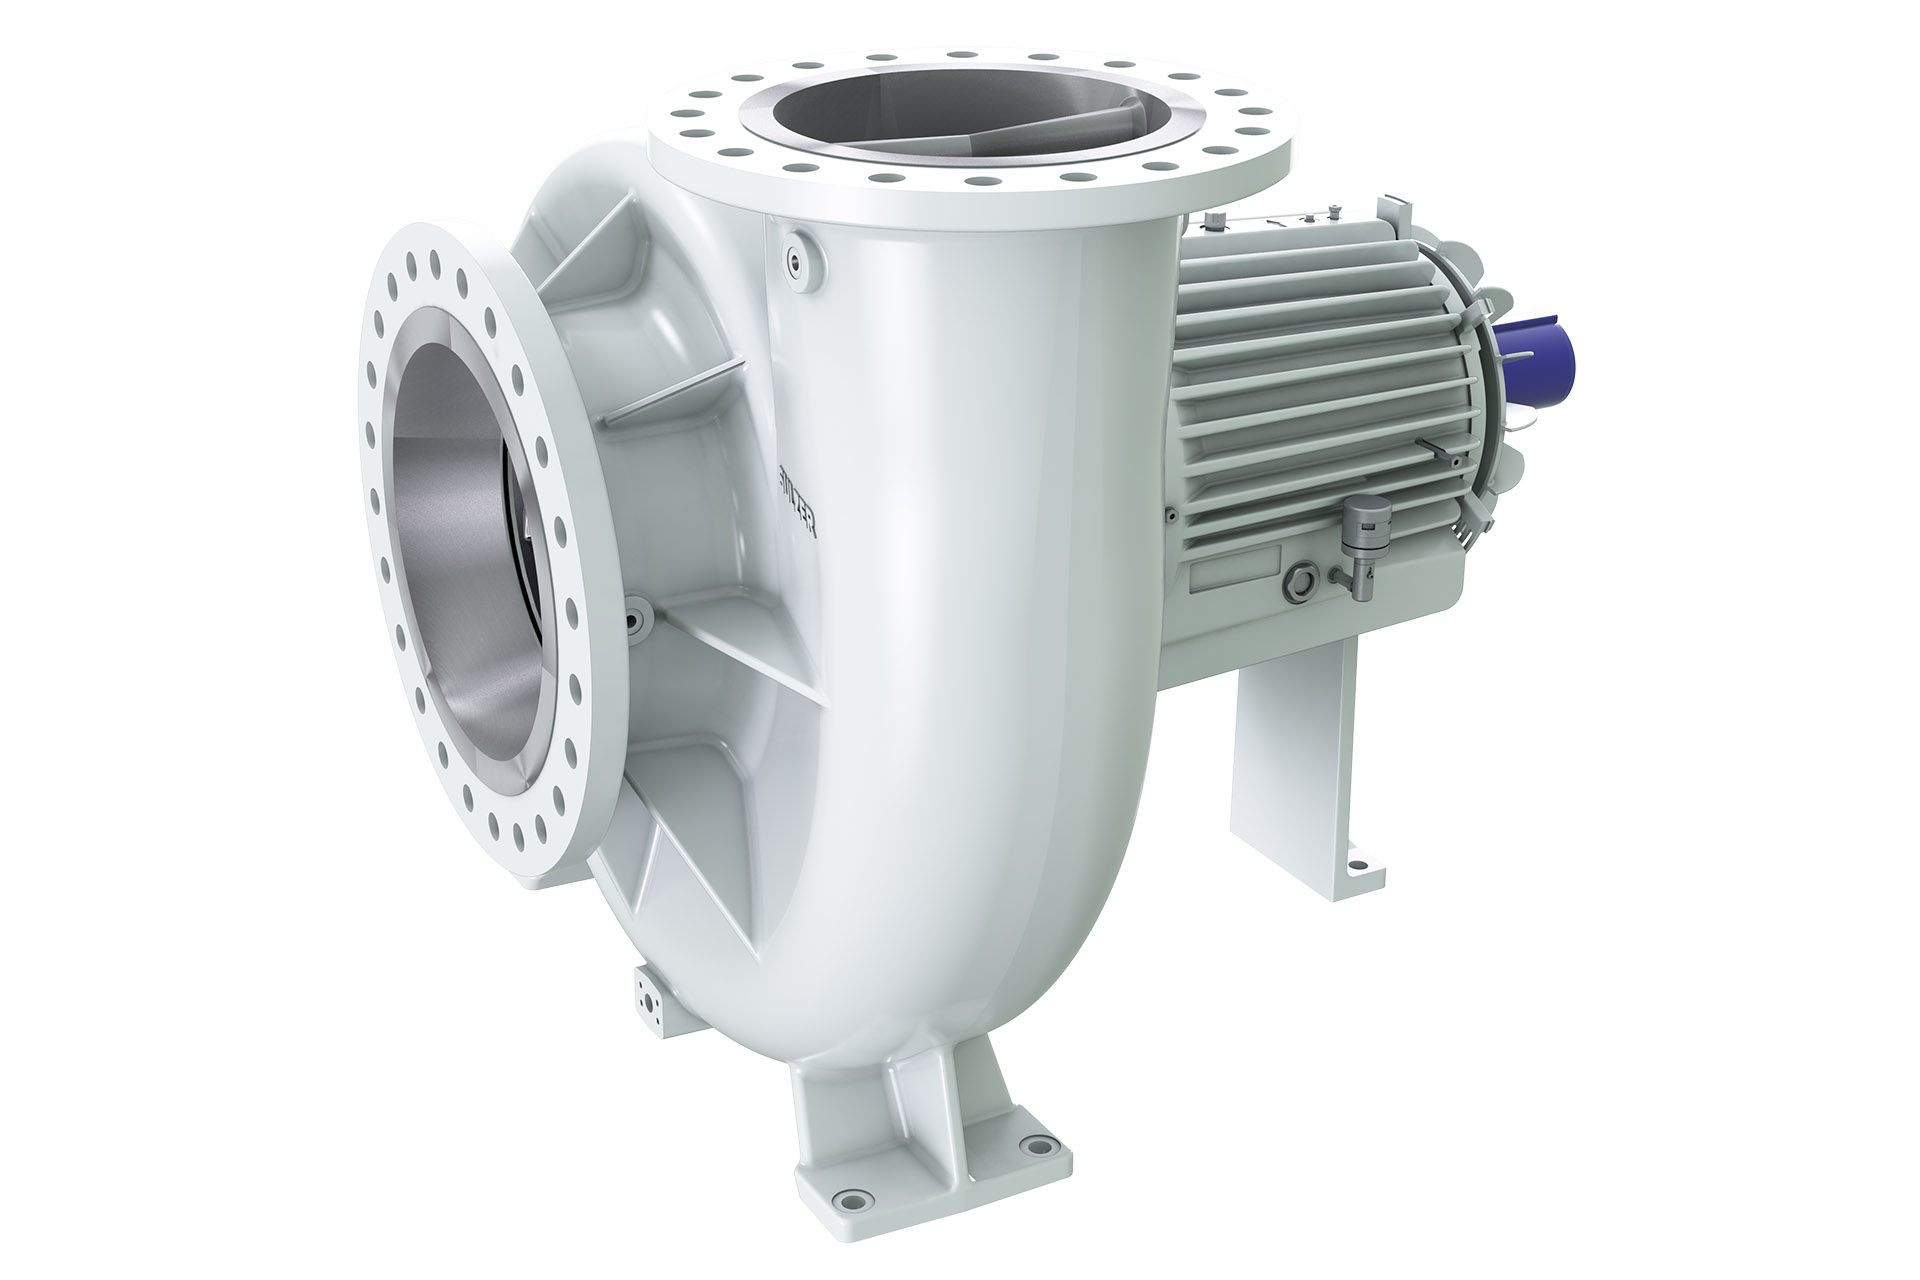 AHLSTAR RO End-Suction Pump